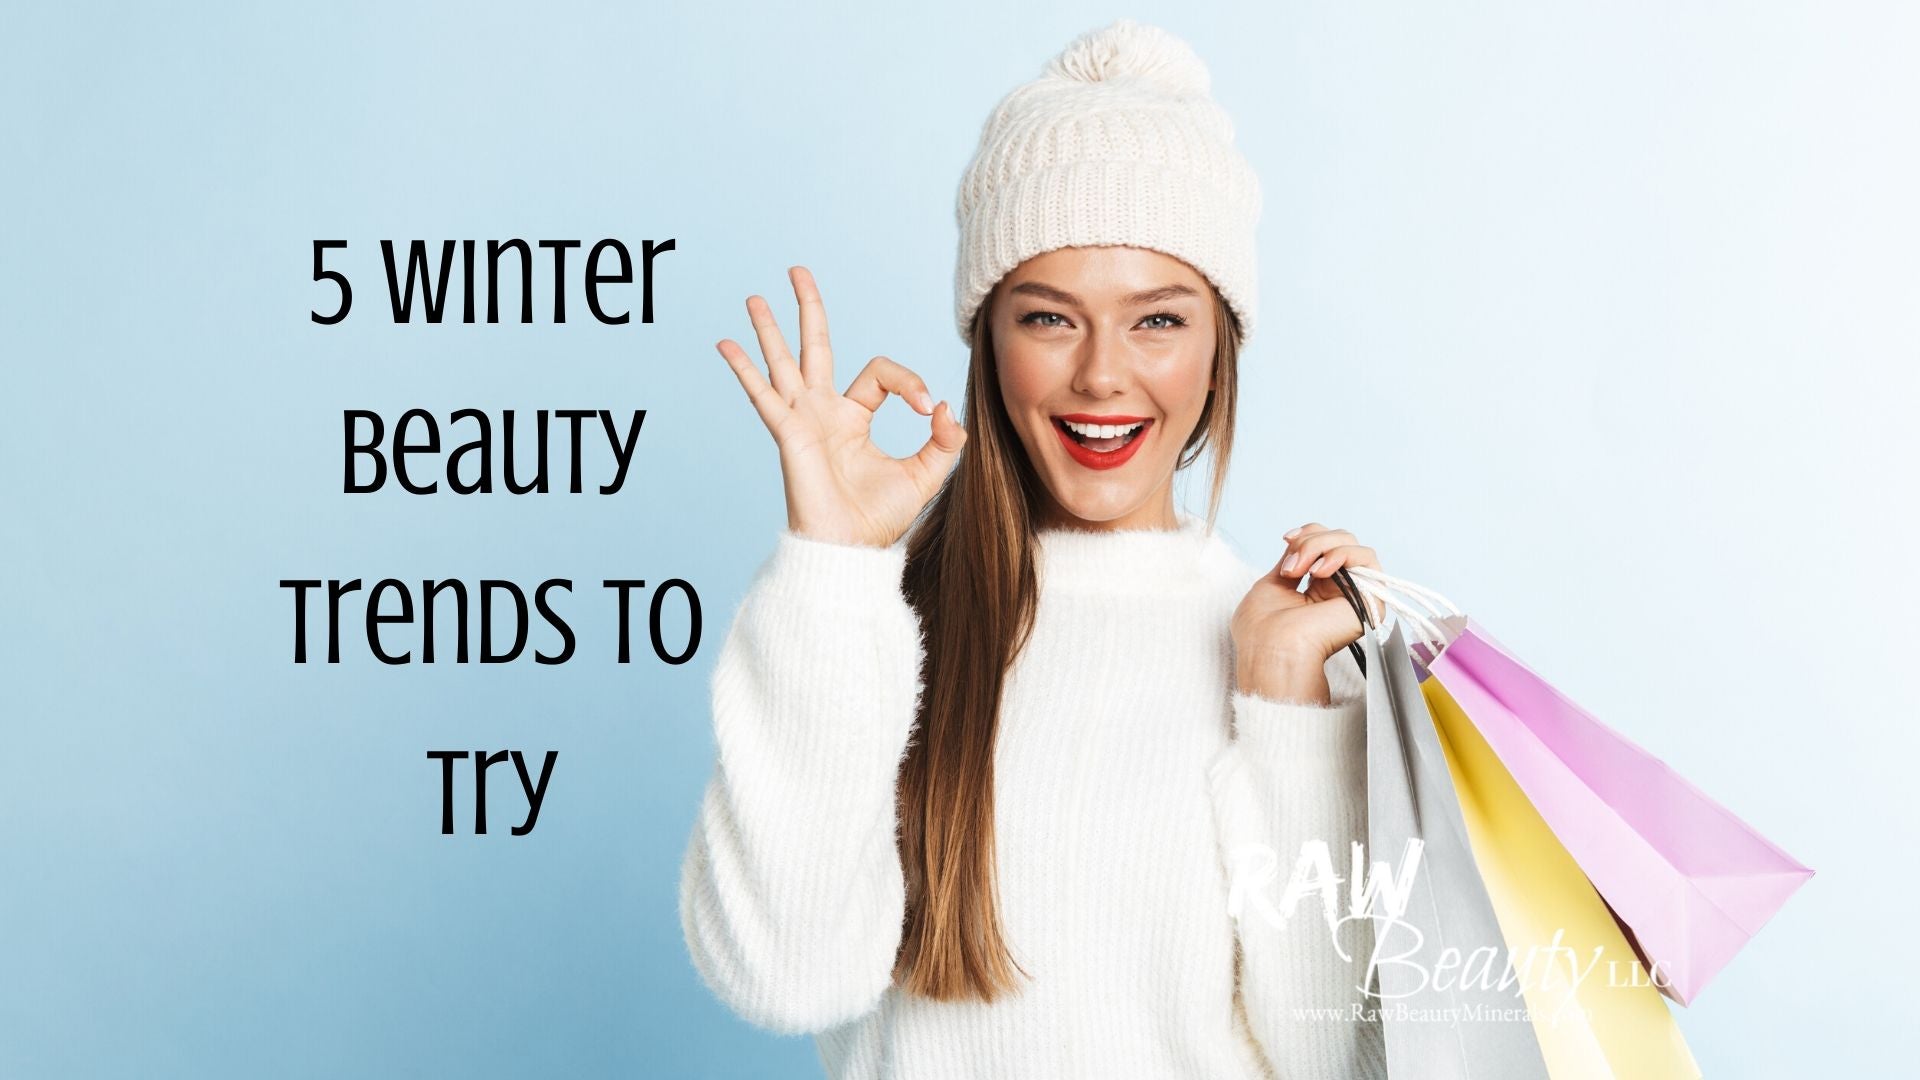 5 Winter Beauty Trends to Try